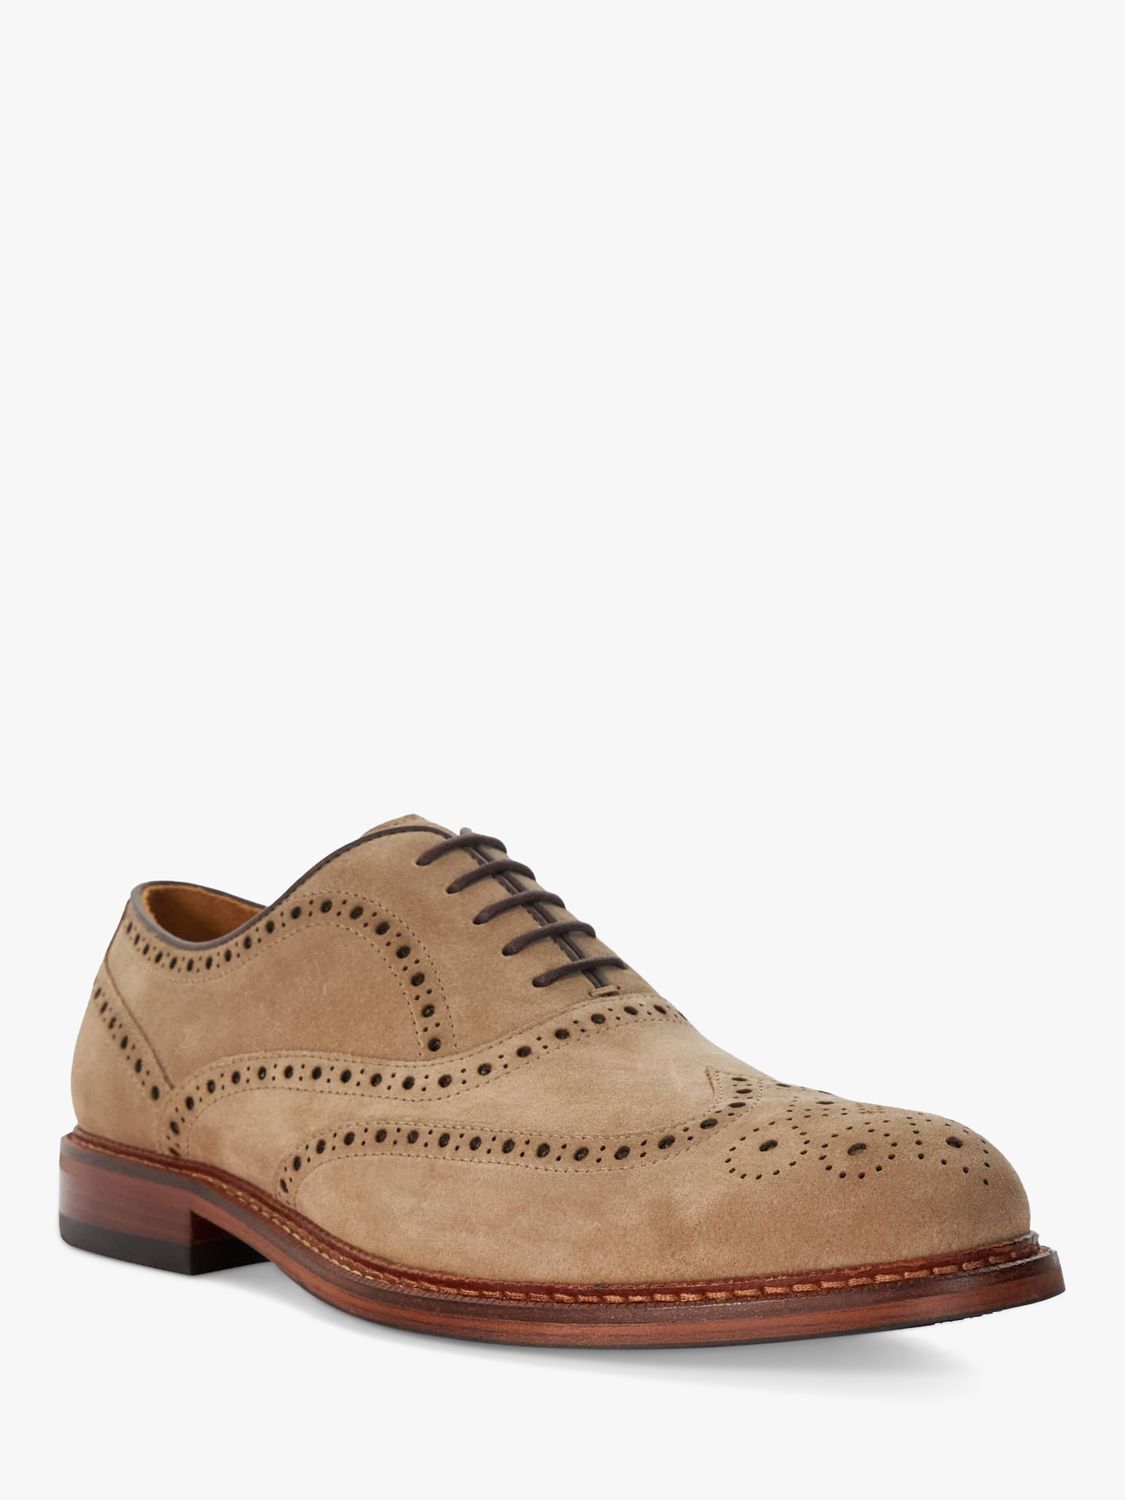 Buy Dune Solihull Suede Oxford Brogue Shoes Online at johnlewis.com